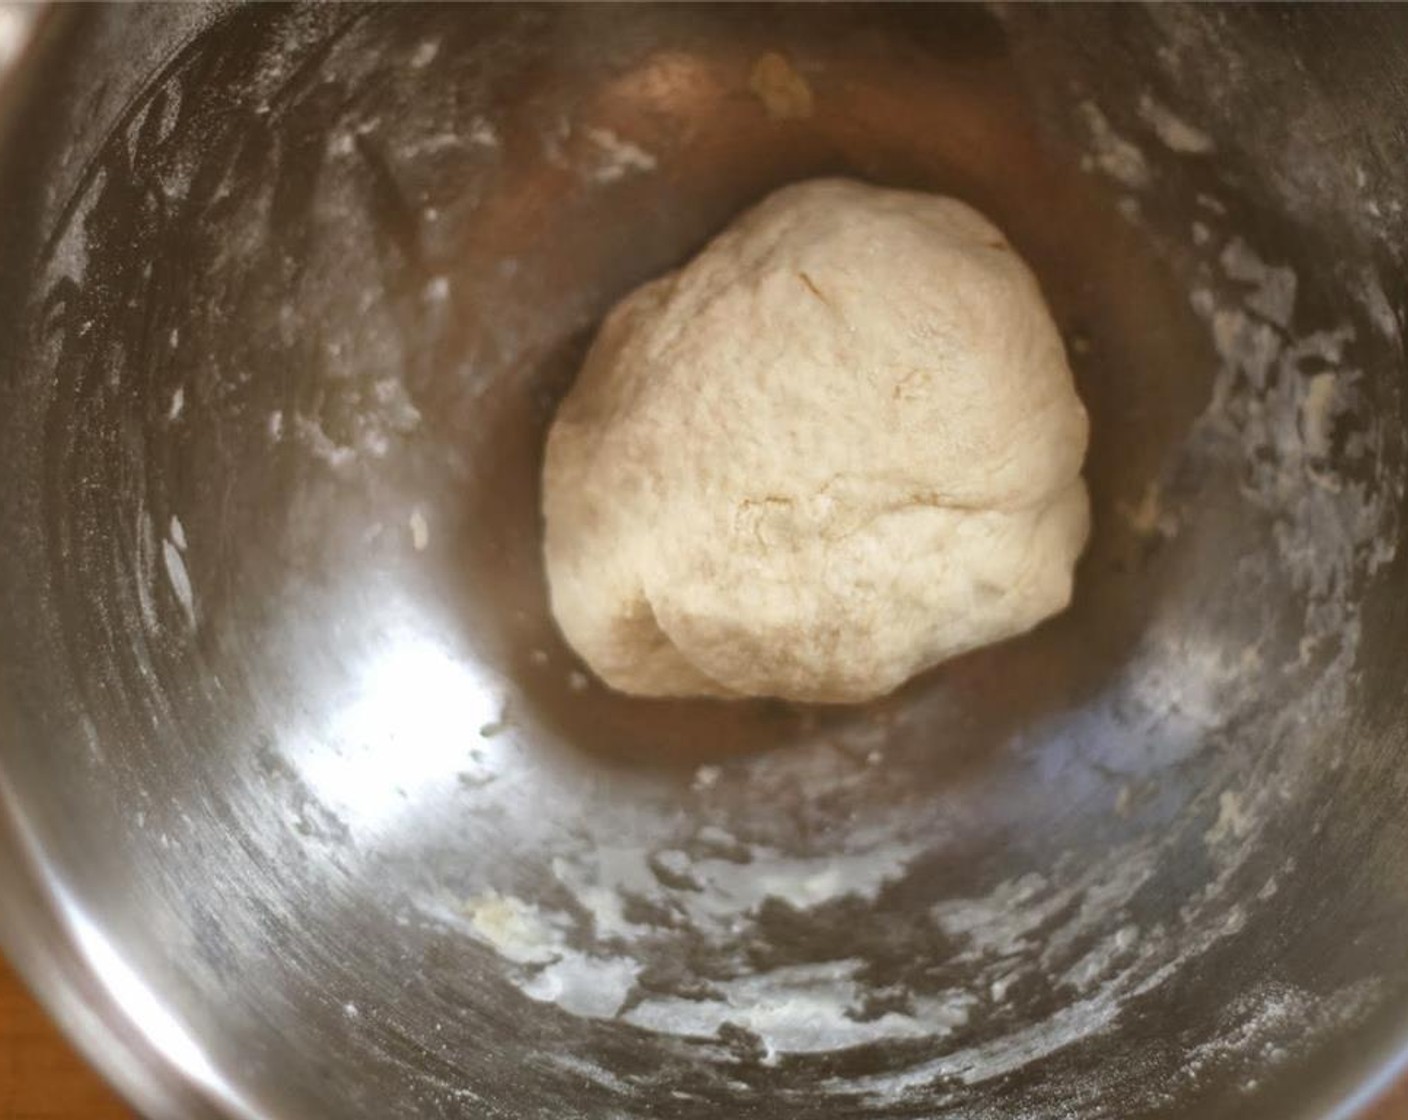 step 3 While the onions caramelize, make the dough by mixing together the All-Purpose Flour (1 cup), Vegetable Oil (1 1/2 Tbsp), Water (1/2 cup), and a Salt (1 pinch). Knead well, adding additional flour until the dough is not at all sticky.